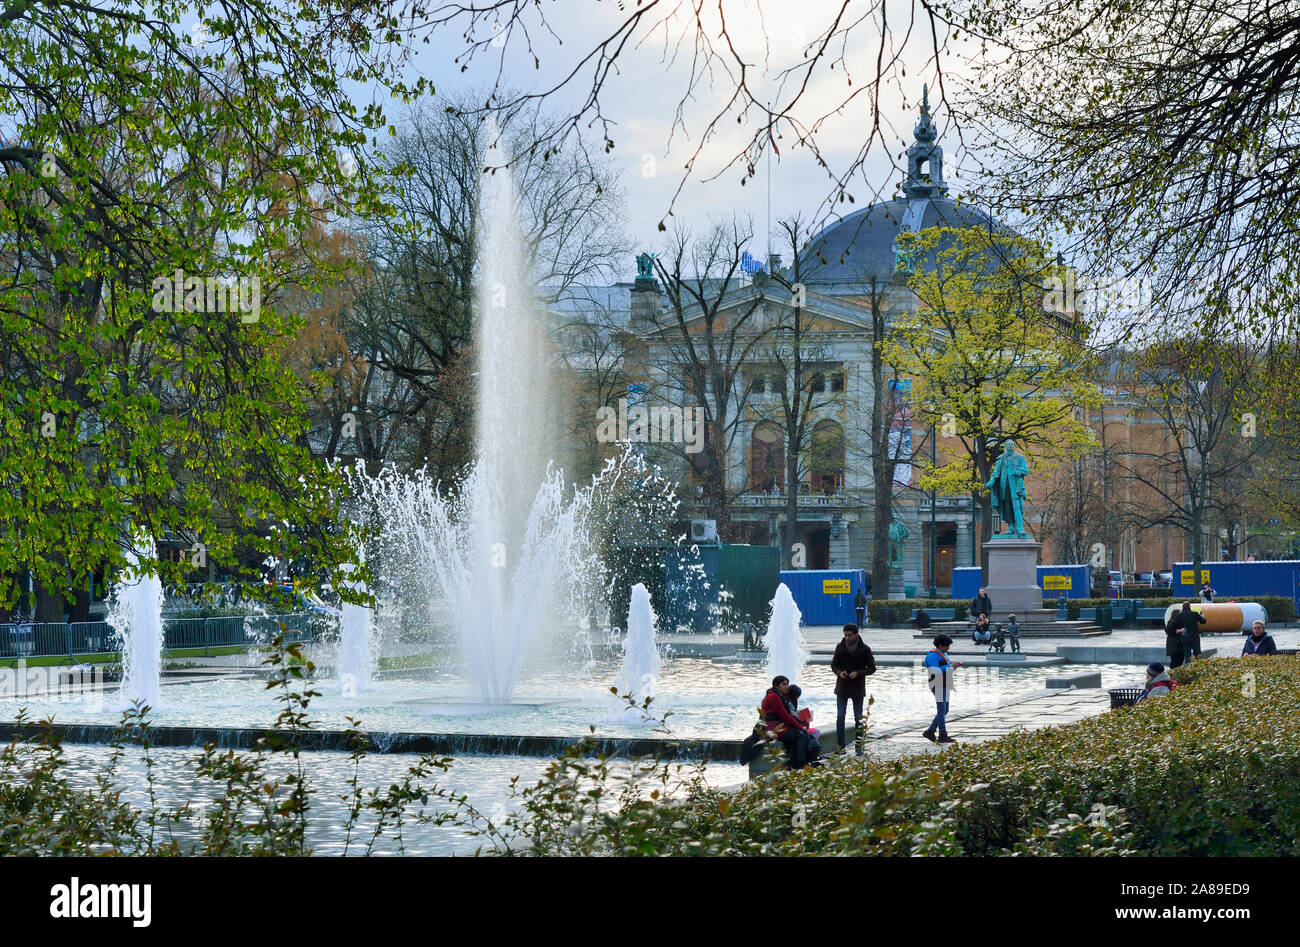 The National Theater in the middle of a green park. Oslo, Norway Stock Photo